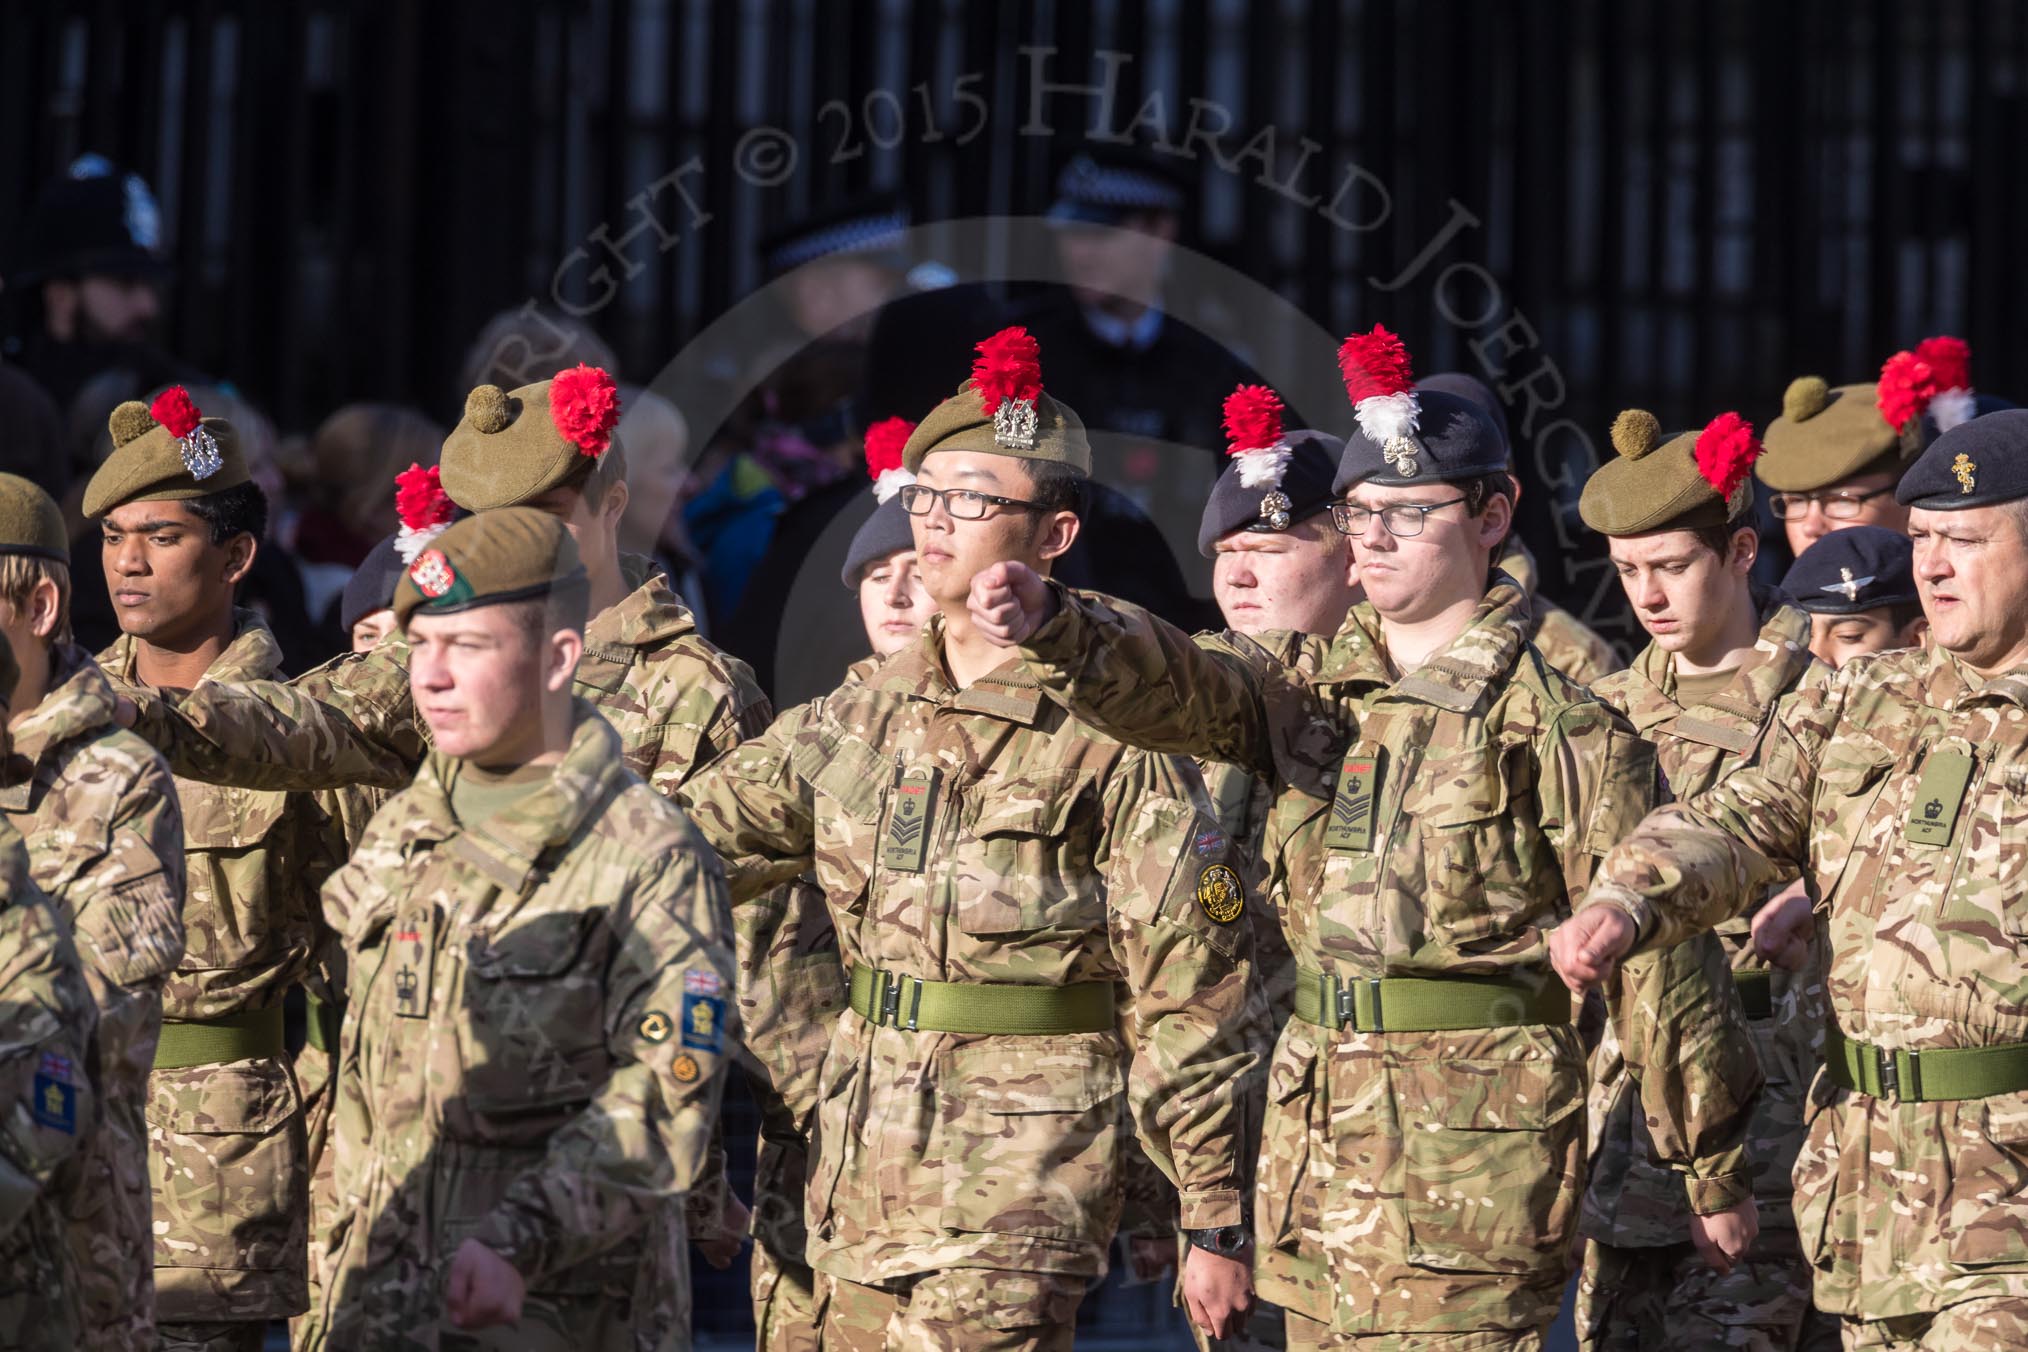 March Past, Remembrance Sunday at the Cenotaph 2016: M32 Army and combined Cadet Force.
Cenotaph, Whitehall, London SW1,
London,
Greater London,
United Kingdom,
on 13 November 2016 at 13:18, image #2807